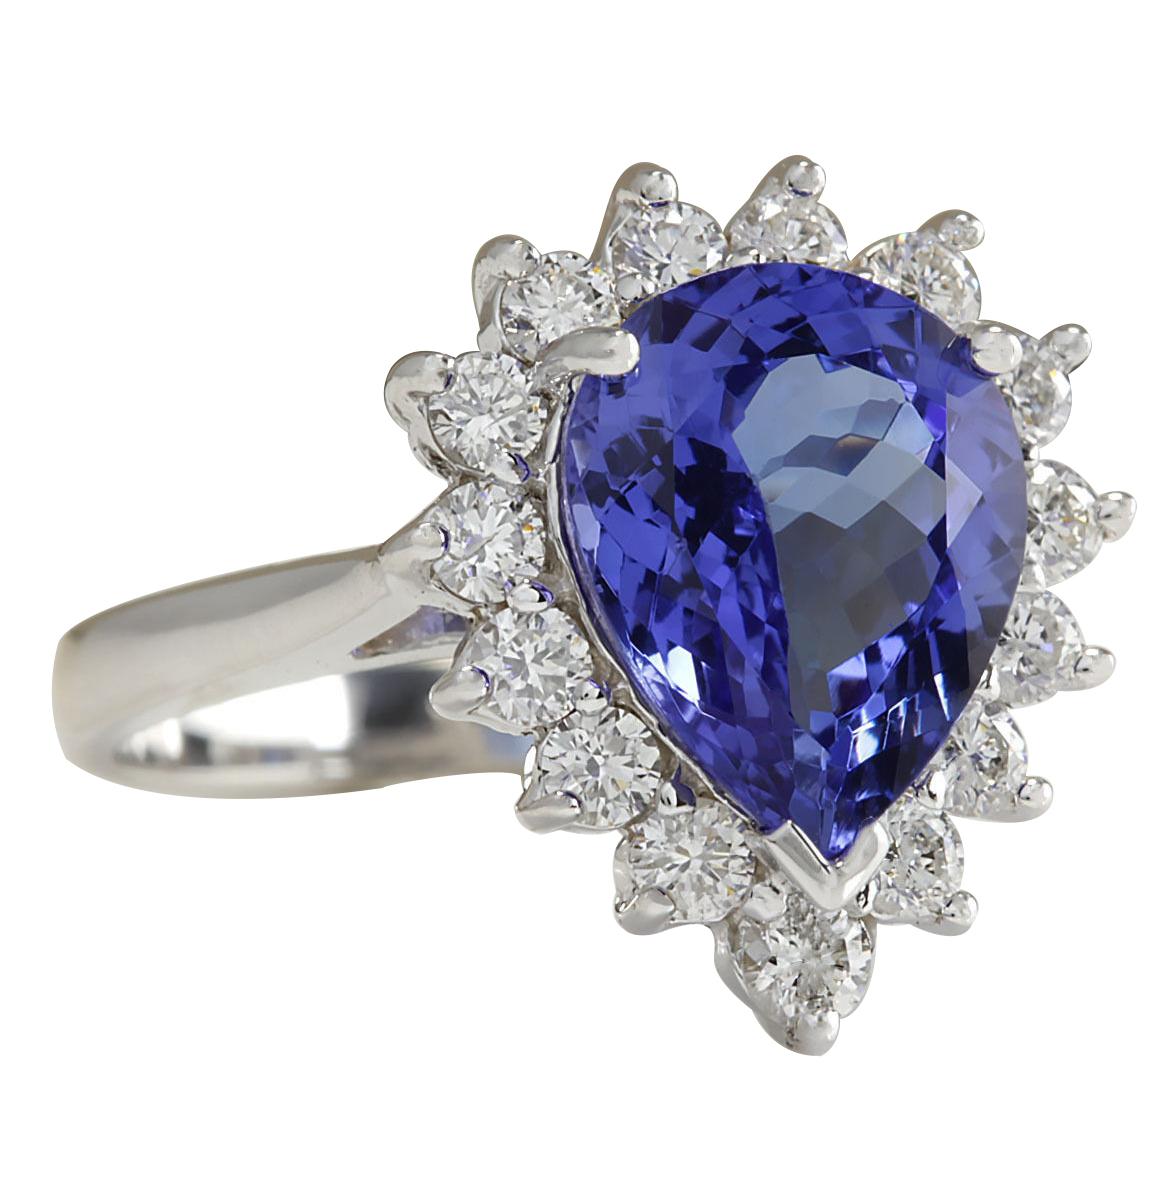 Stamped: 18K White Gold
Total Ring Weight: 5.8 Grams
Ring Length: N/A
Ring Width: N/A
Gemstone Weight: Total Natural Tanzanite Weight is 3.16 Carat (Measures: 12.05x8.95 mm)
Color: Blue
Diamond Weight: Total Natural Diamond Weight is 0.70